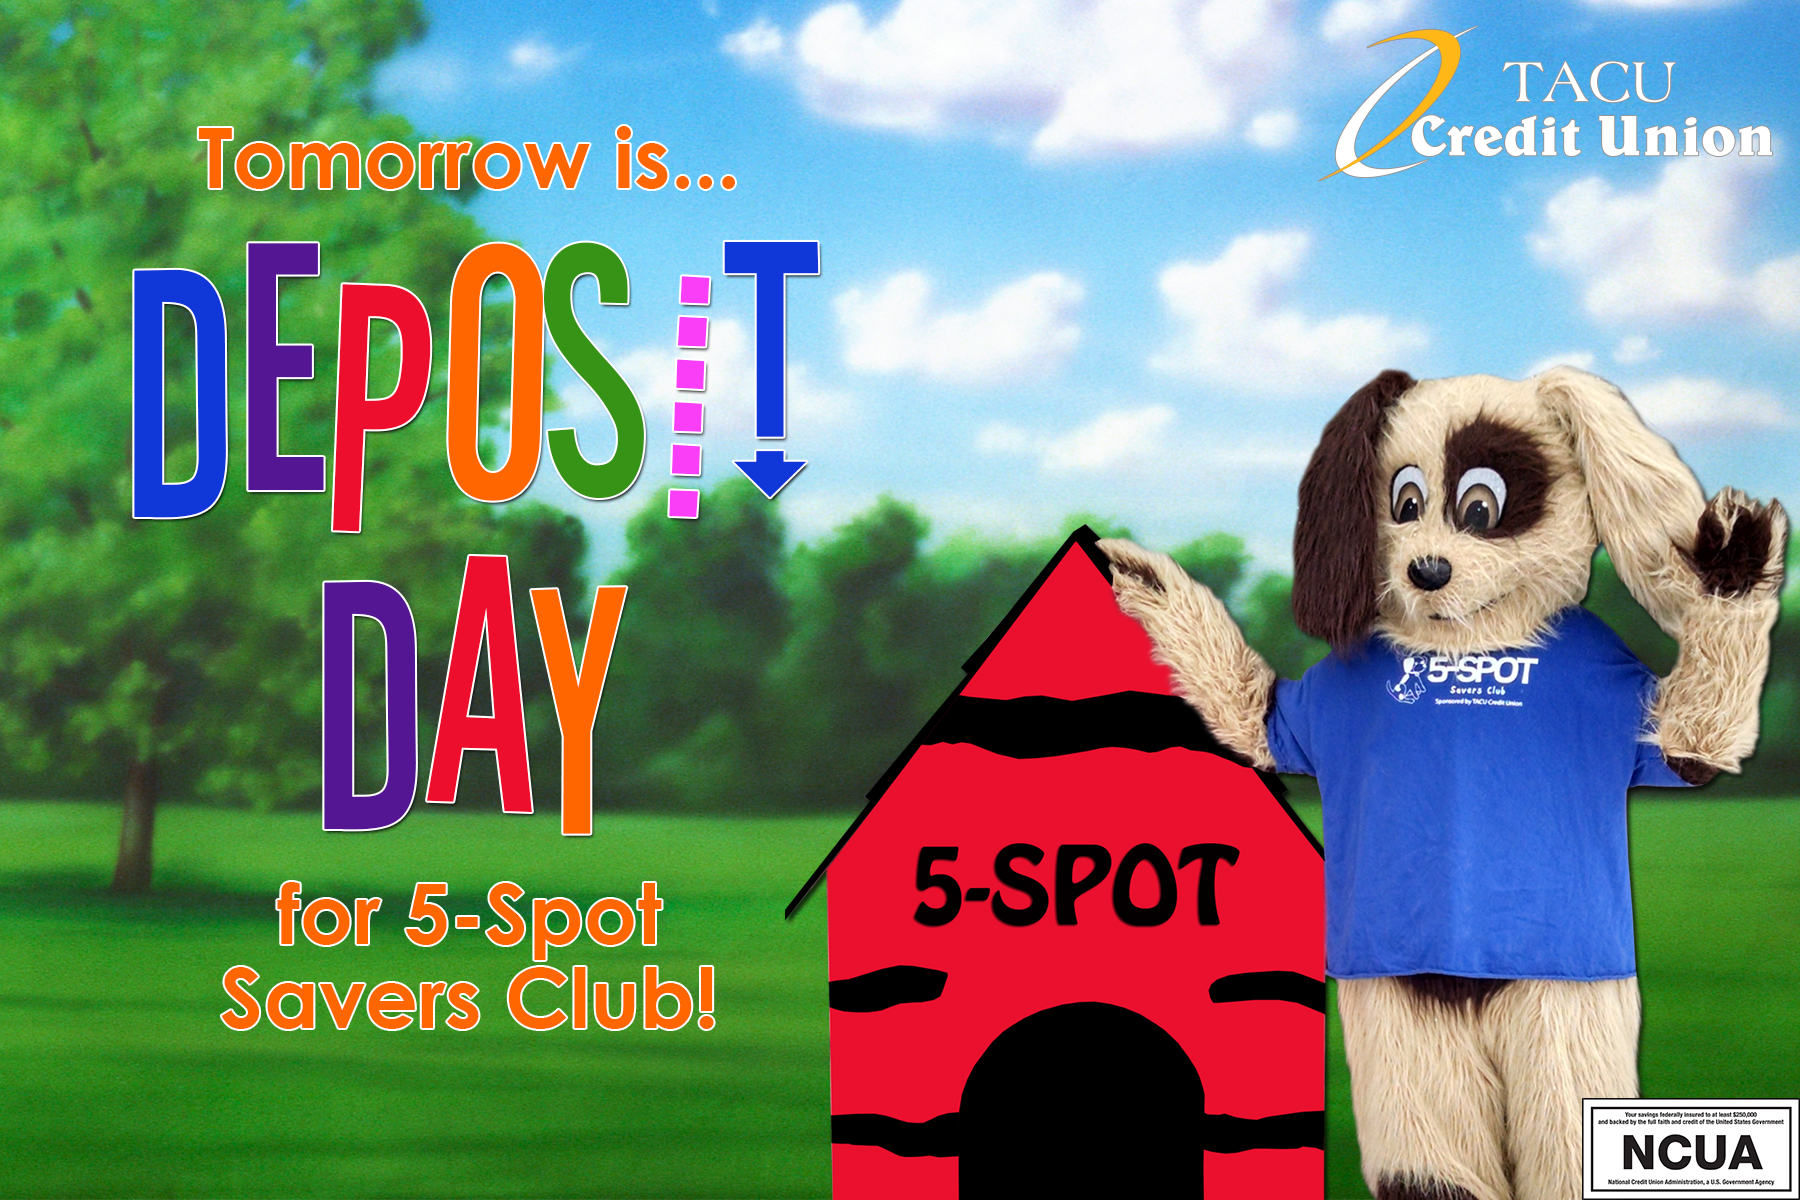 Tomorrow is Deposit Day for 5-Spot Savers Club!